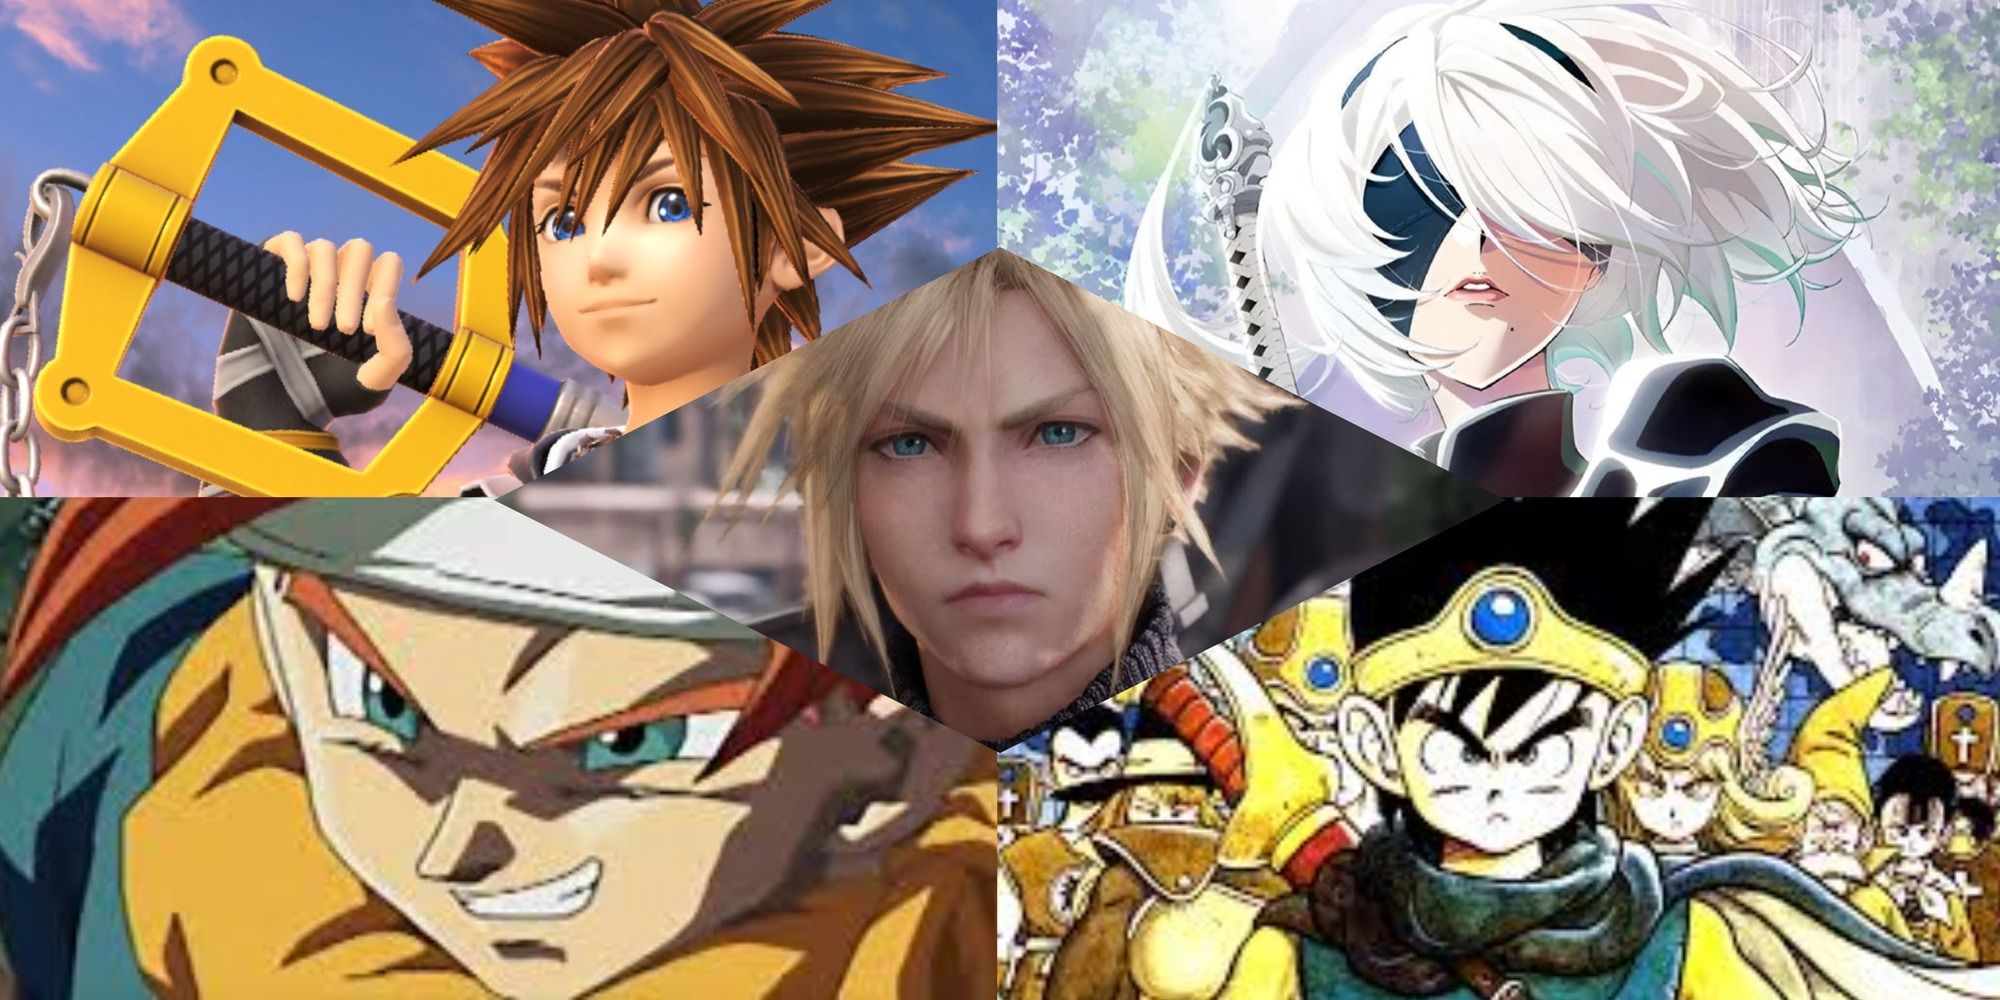 Most Iconic Square Enix Protagonists